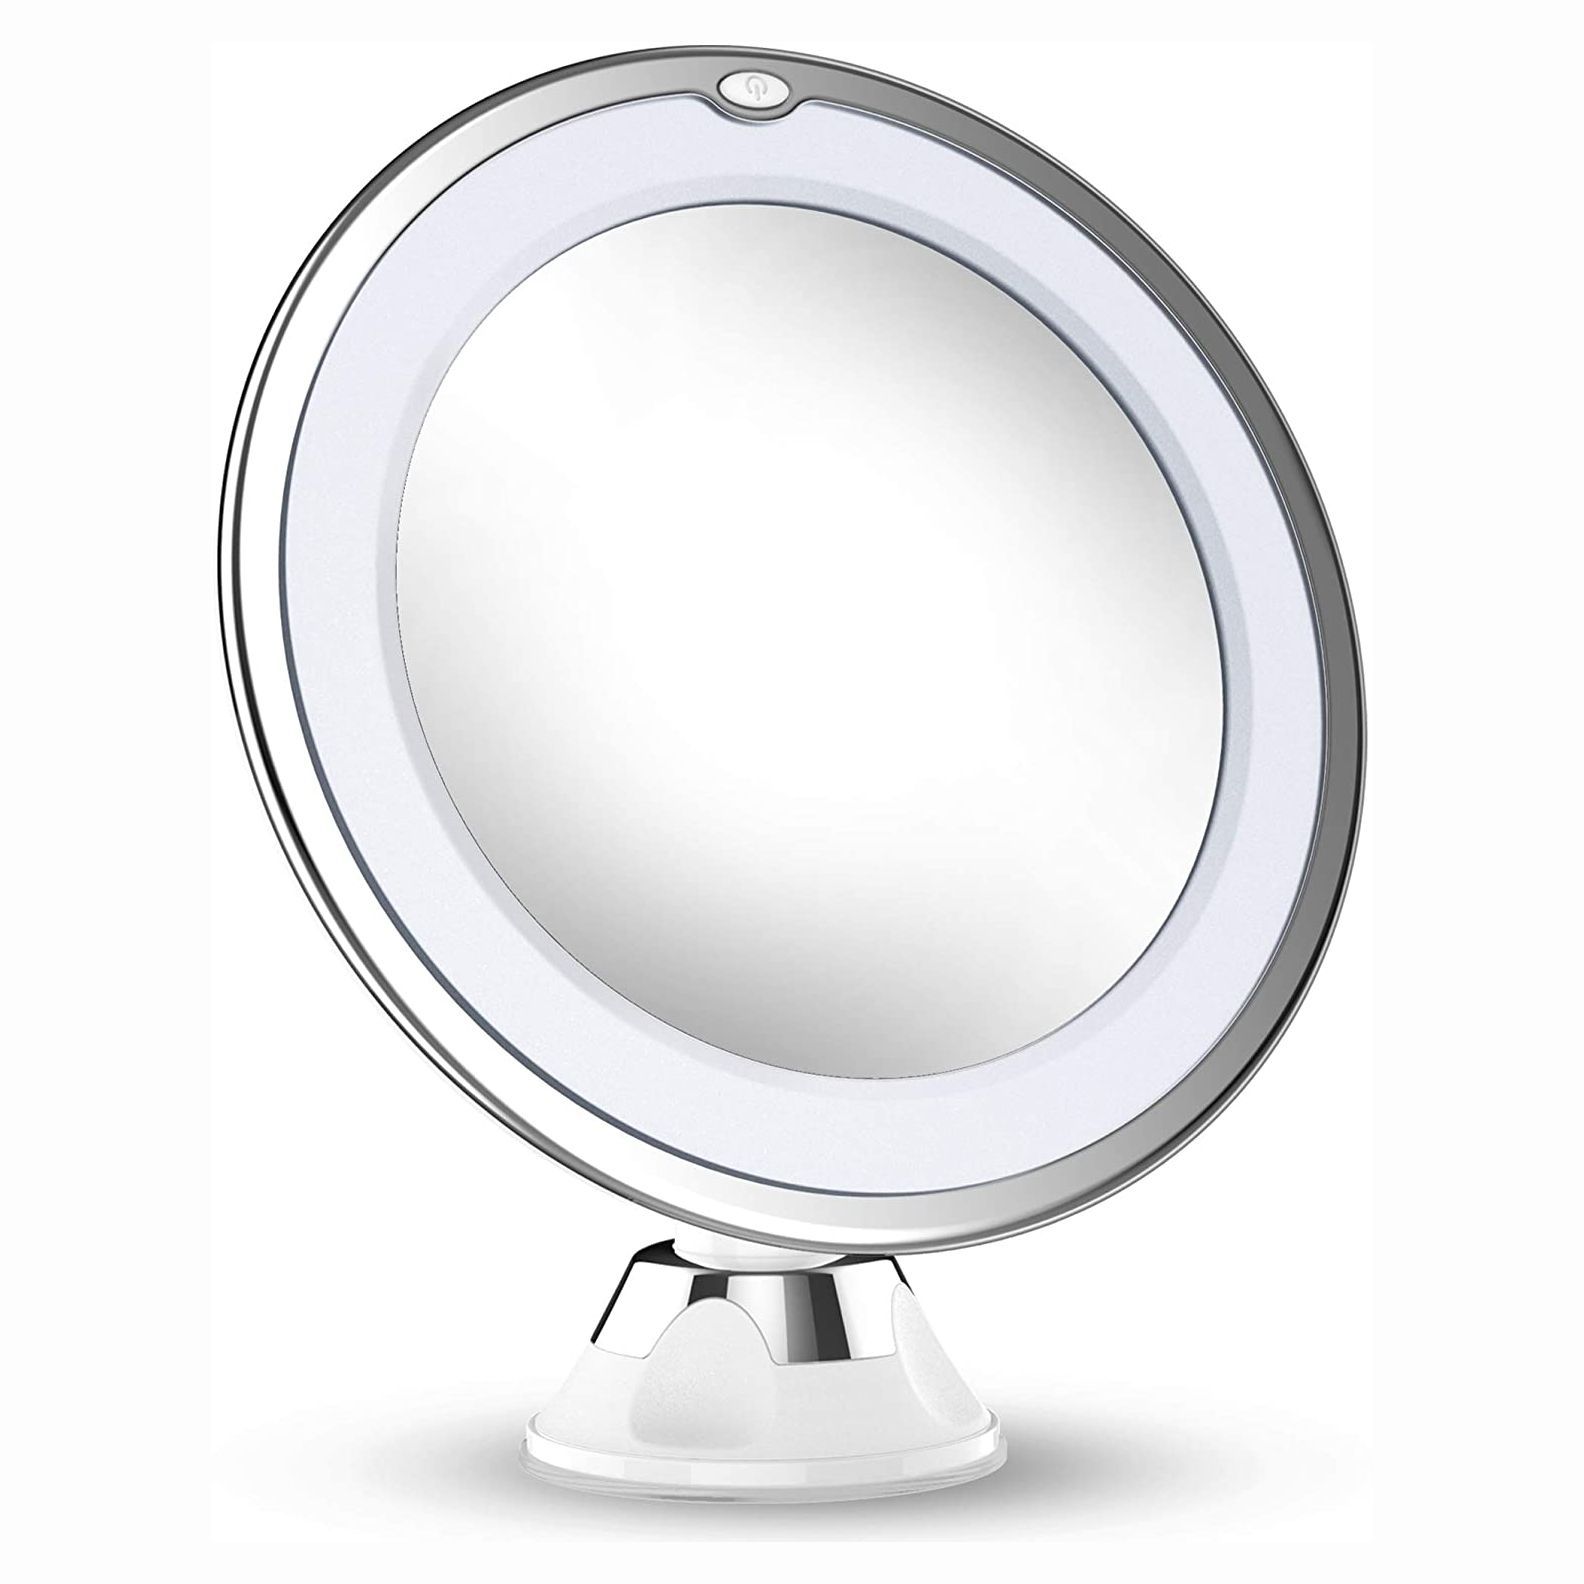 Vanity Makeup Mirrors, Best Lighted Makeup Mirror 5x Magnification